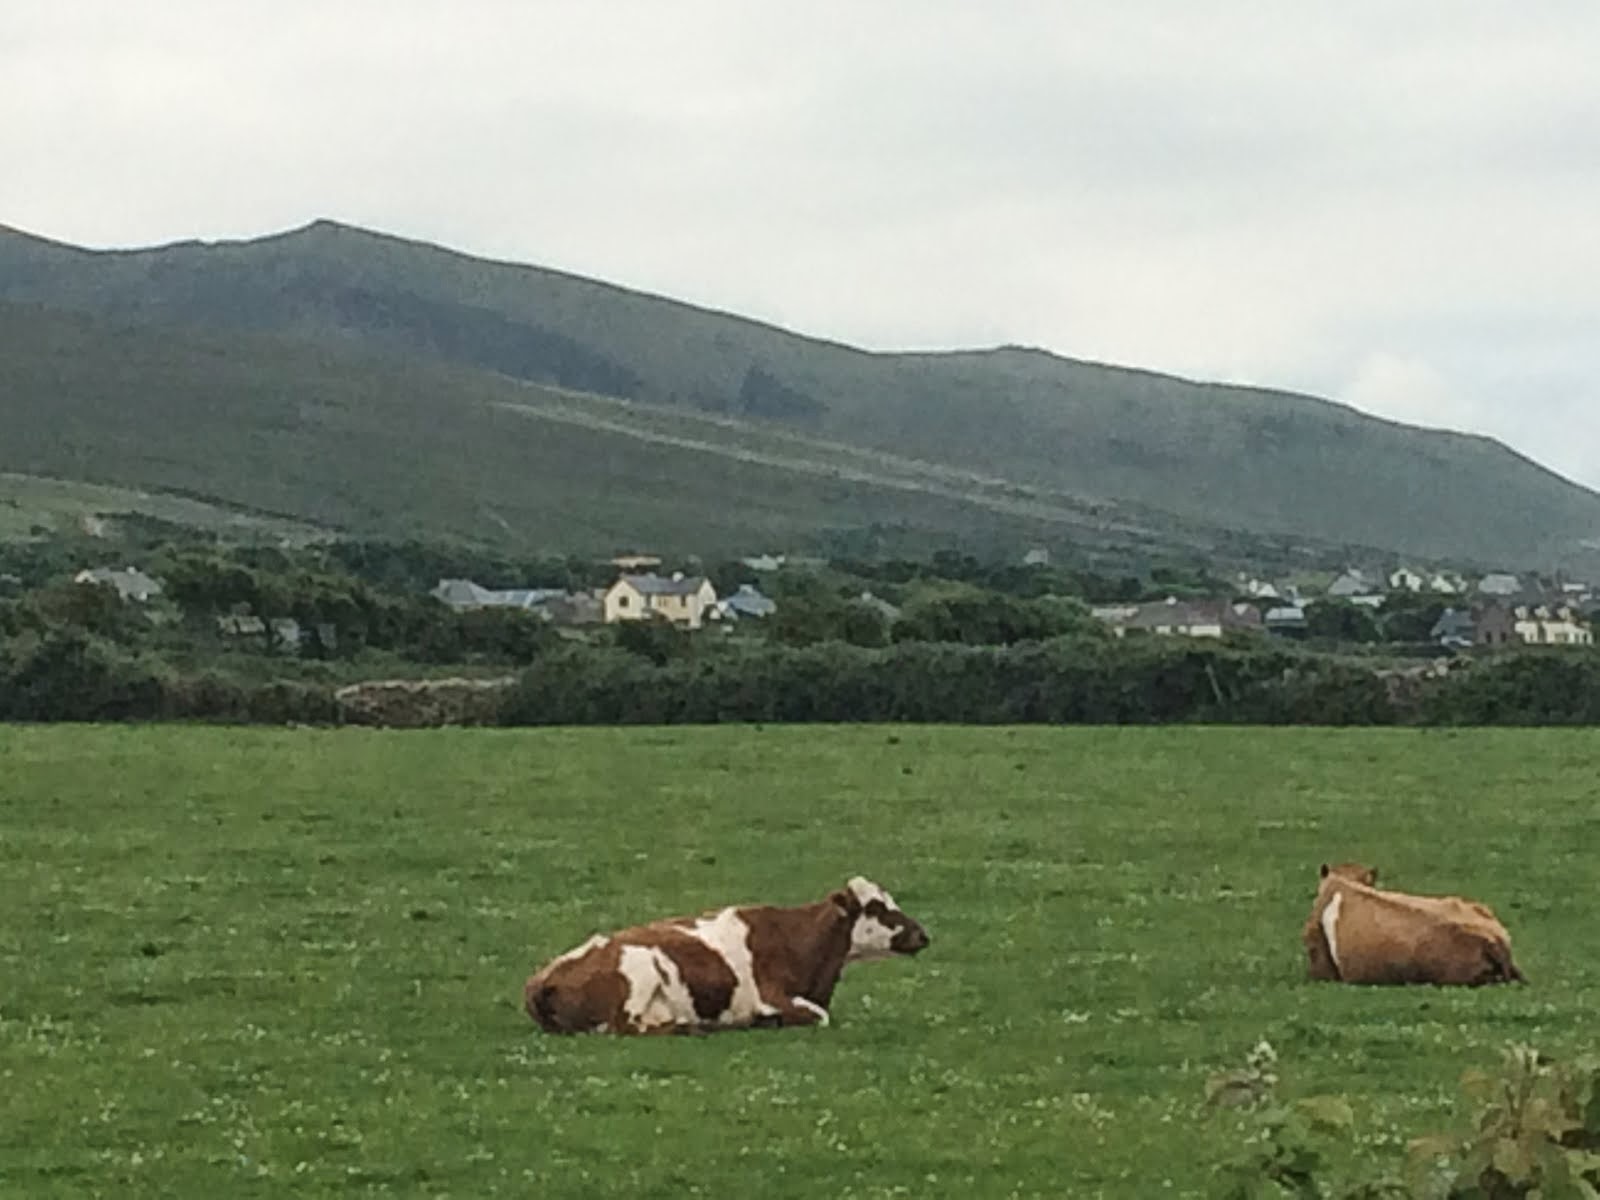 Irish cows must be the happiest.